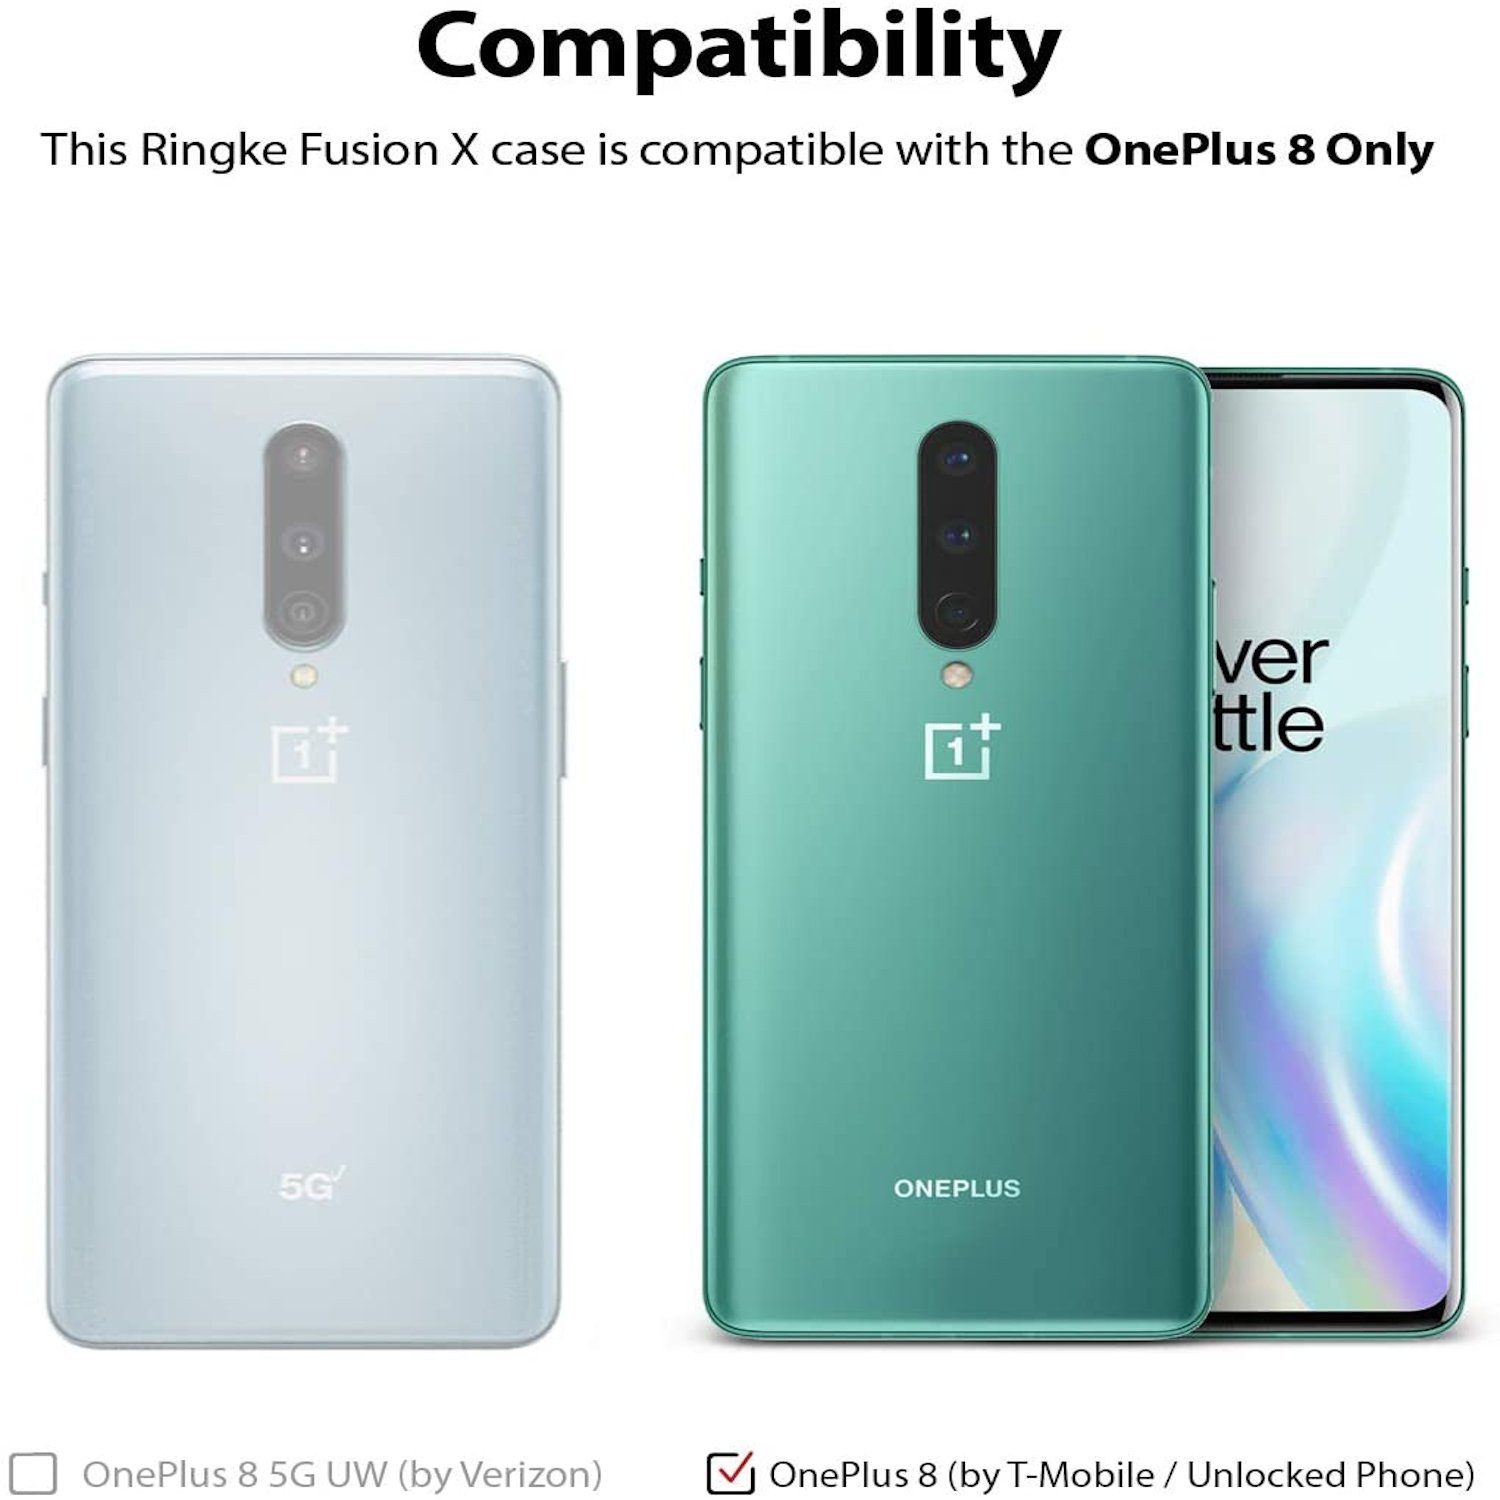 Ringke Fusion X Case for OnePlus 8 Pro, Turquoise Green Oneplus 8 Pro Ringke 